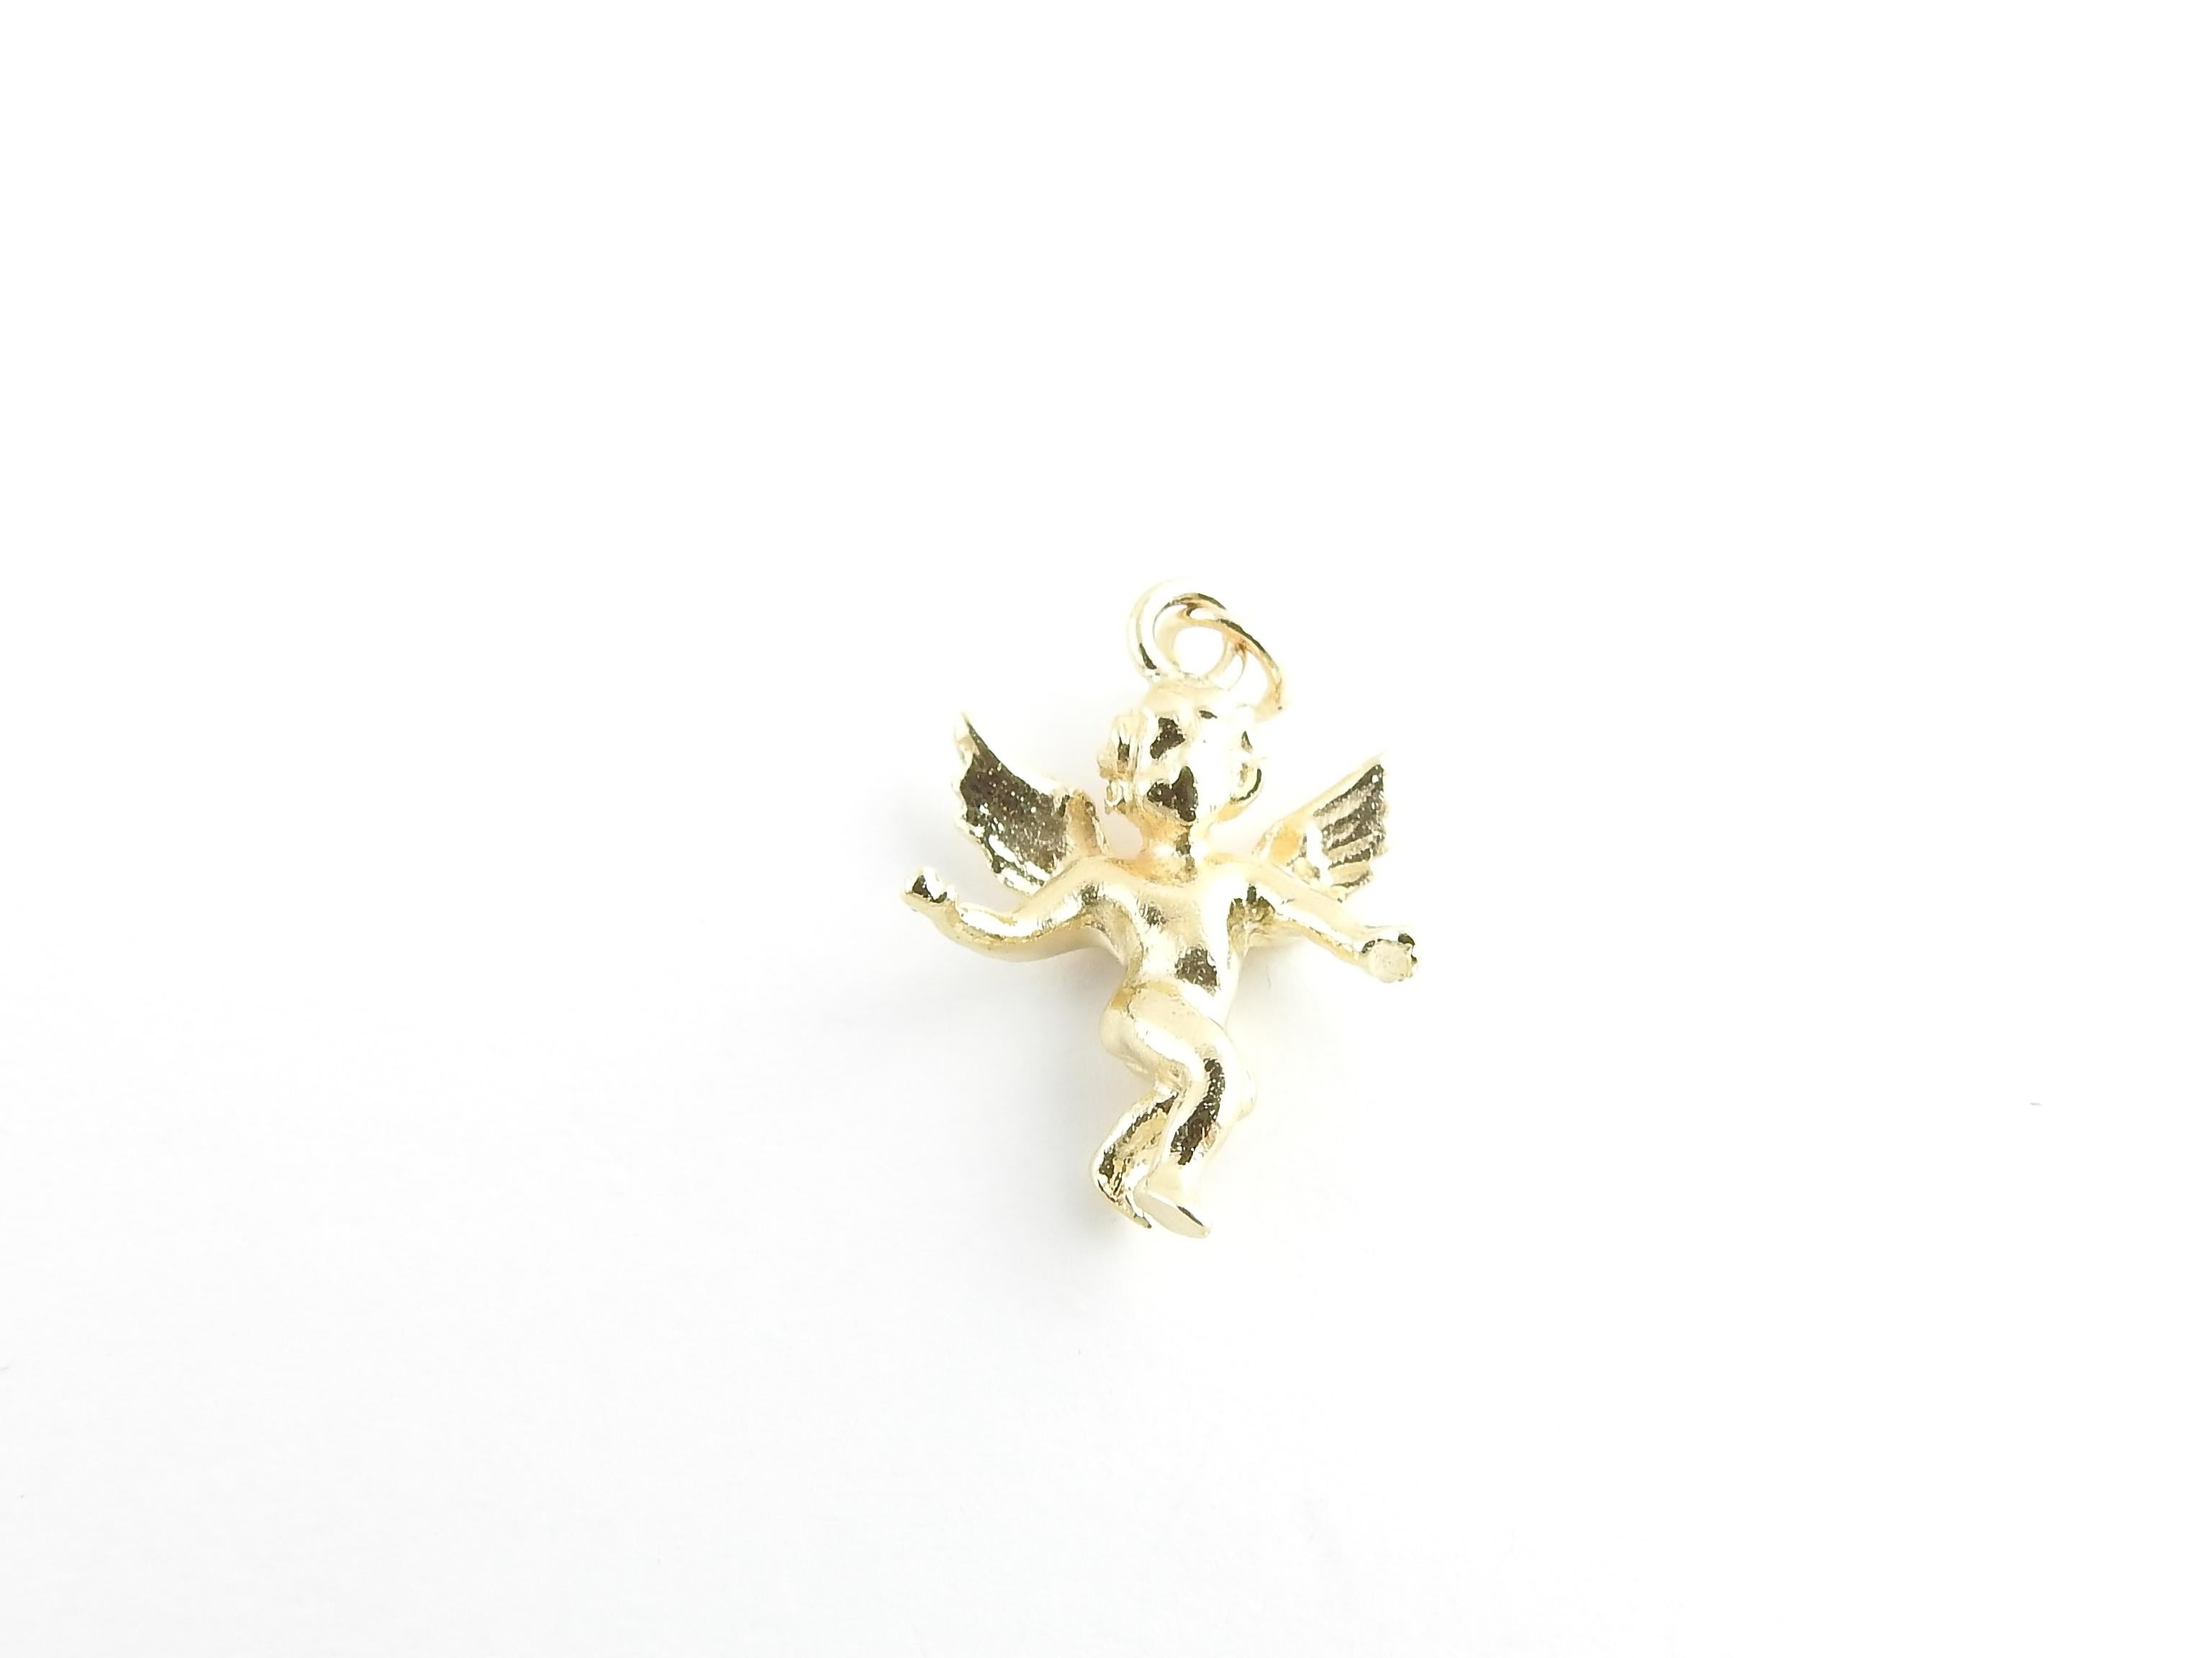 Vintage 14 Karat Yellow Gold Angel Cherub Charm

Carry your guardian angel with you!

This lovely charm features a miniature winged cherub crafted in beautifully detailed 14K yellow gold.

Size: 23 mm x 14 mm (actual charm)

Weight: 1.9 dwt. / 3.1